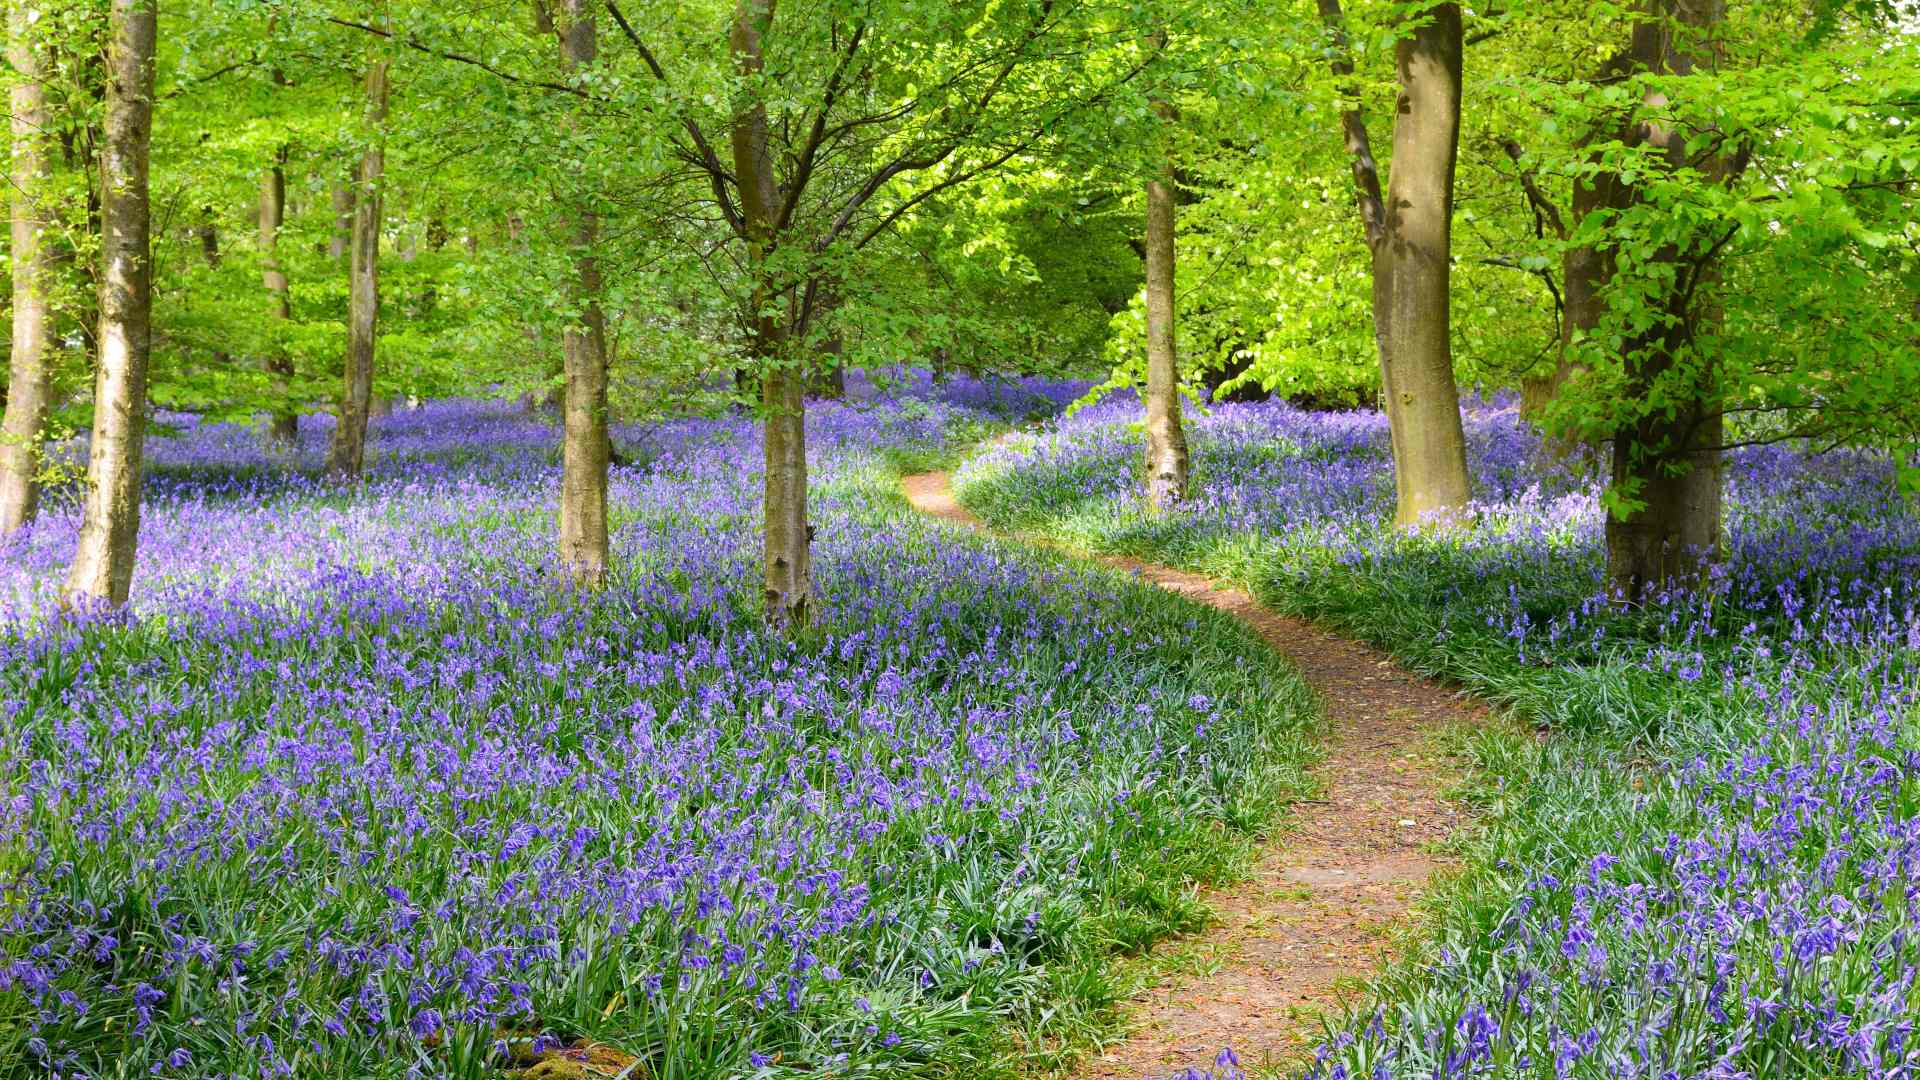 A path through colourful bluebells in a green forest